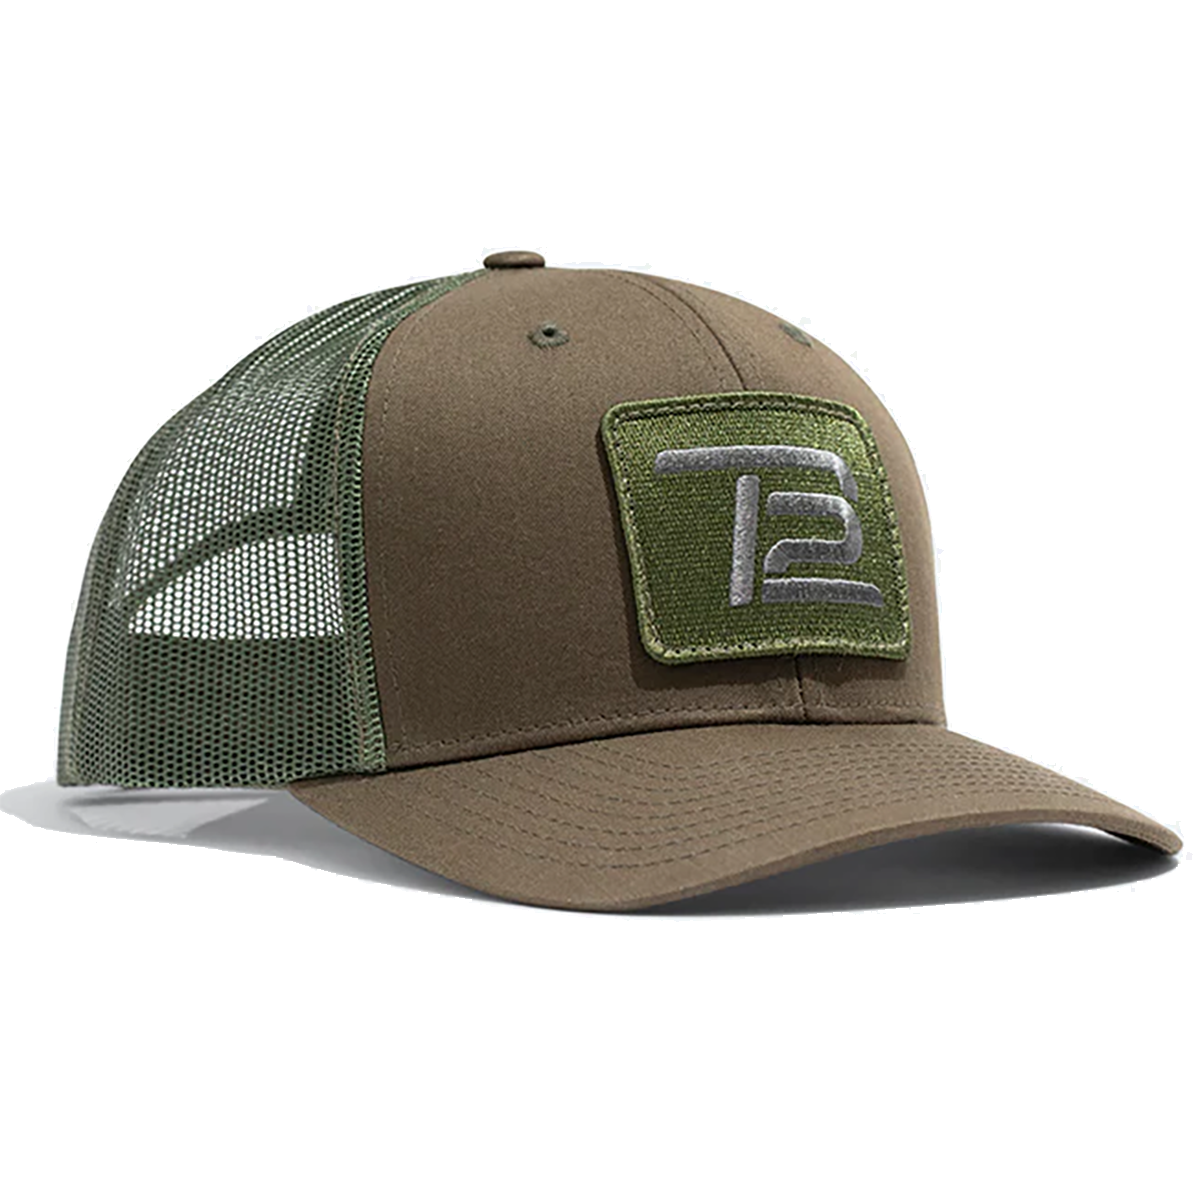 TB12 Trucker Hat, , large image number null